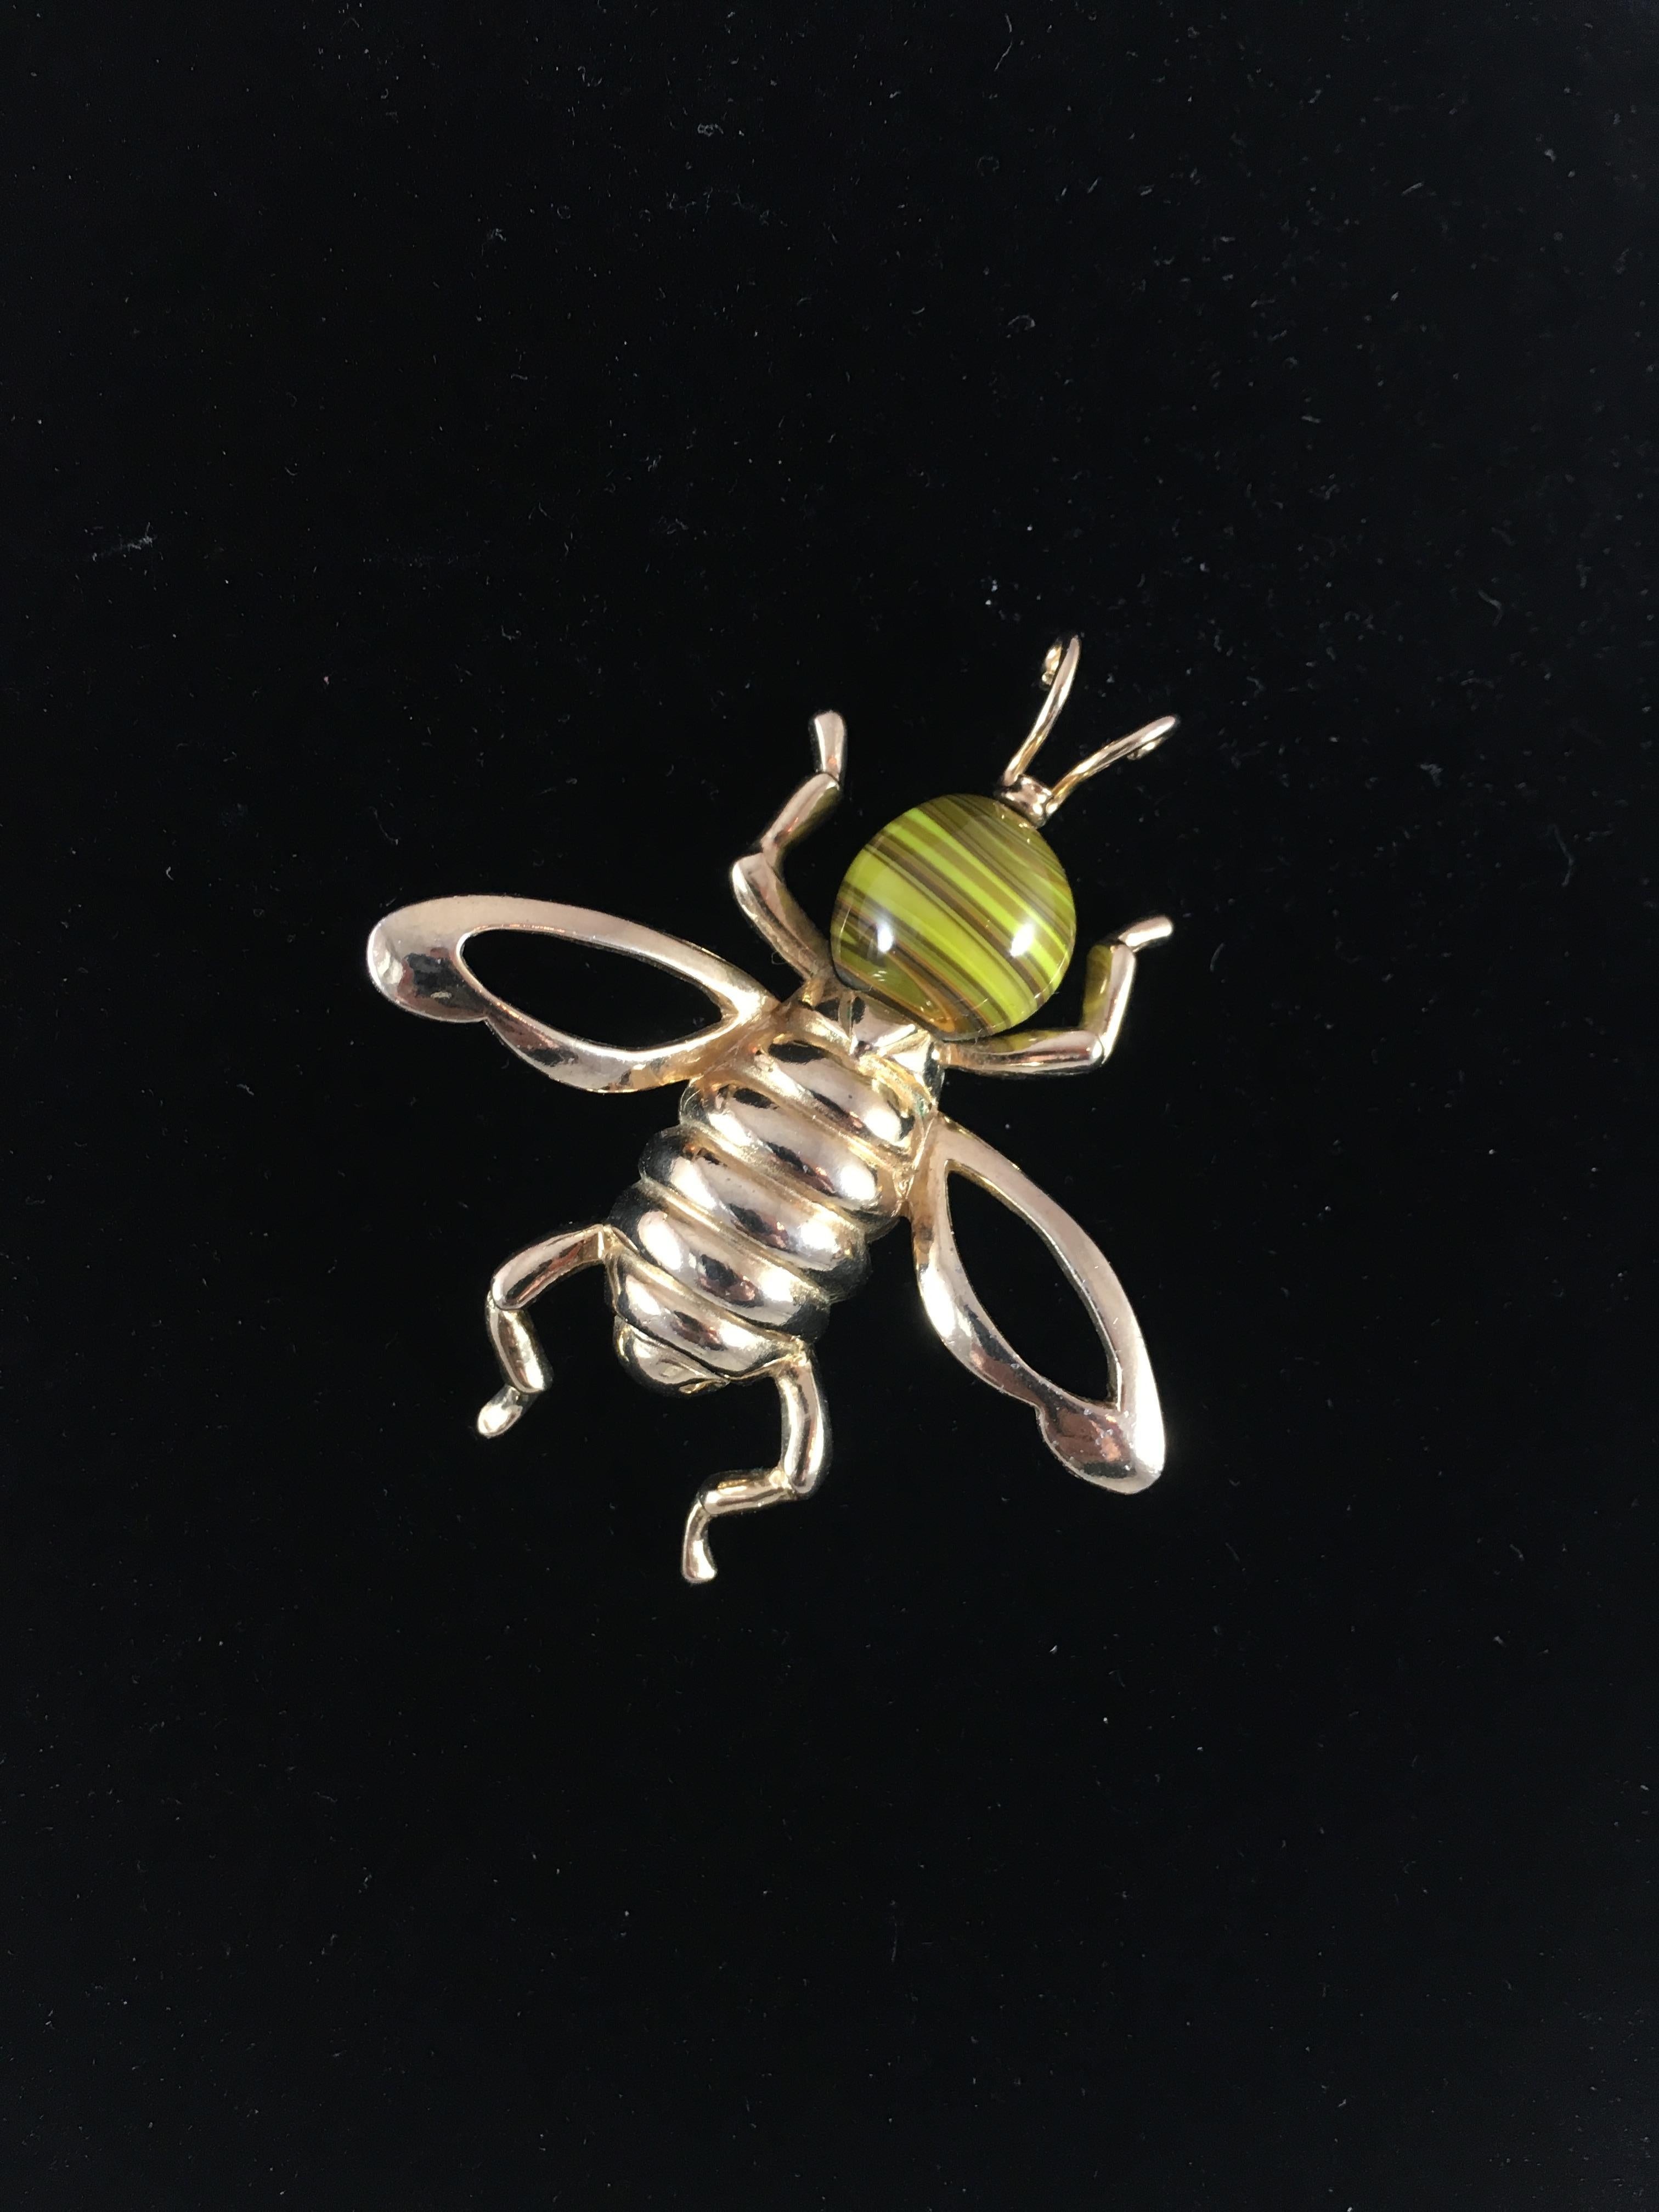 This is an adorable bee brooch made by Castlecliff in the 1950s. It has a gold-tone body and a head made out of striated yellow art glass. It measures 2 1/4 inches long x 2 inches at its widest point and is marked 'Castlecliff' on the back of the